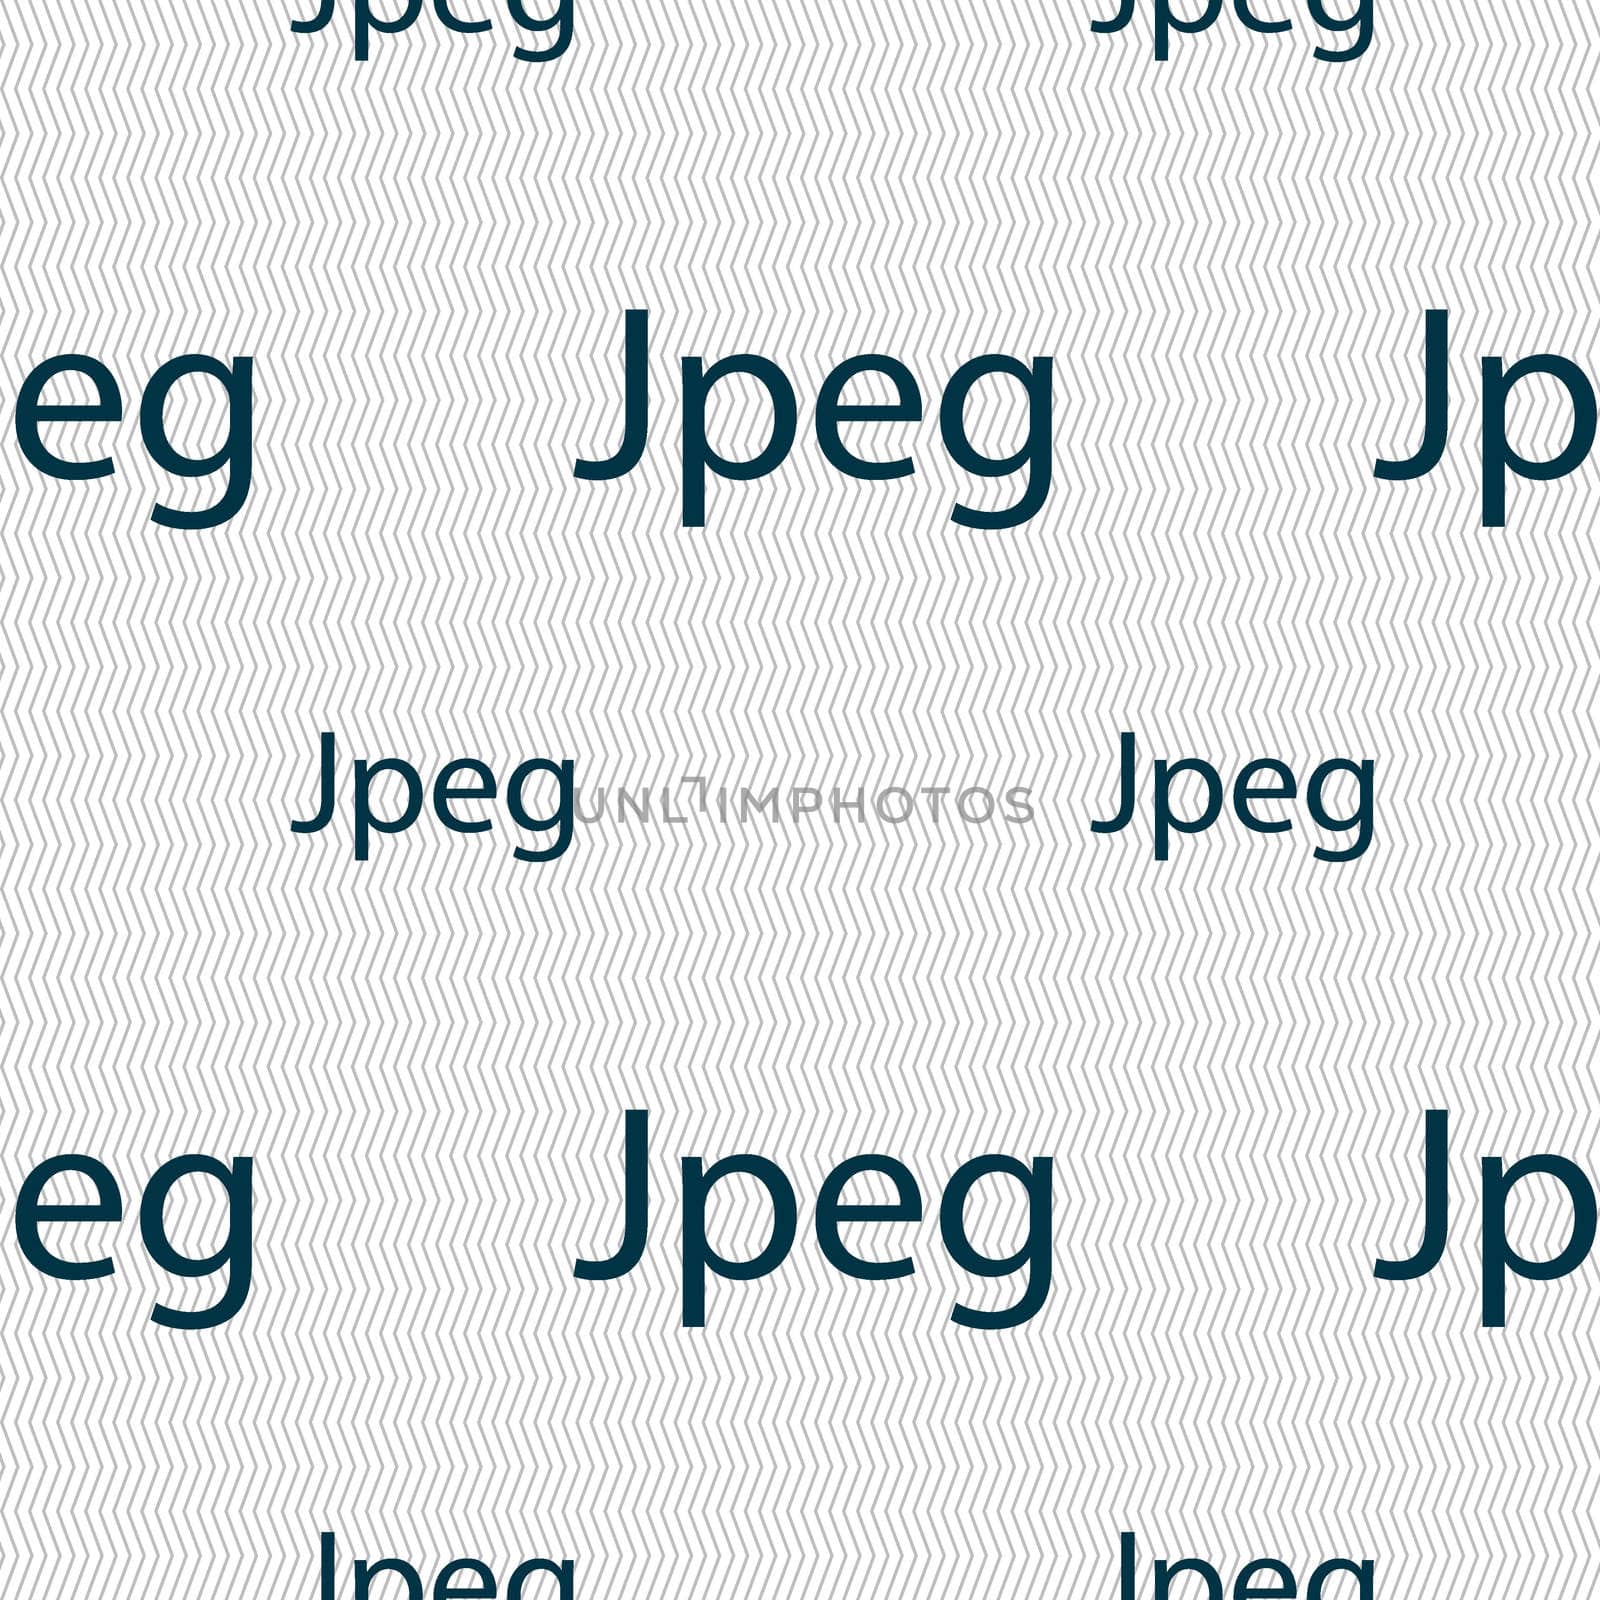 File JPG sign icon. Download image file symbol. Seamless pattern with geometric texture. illustration